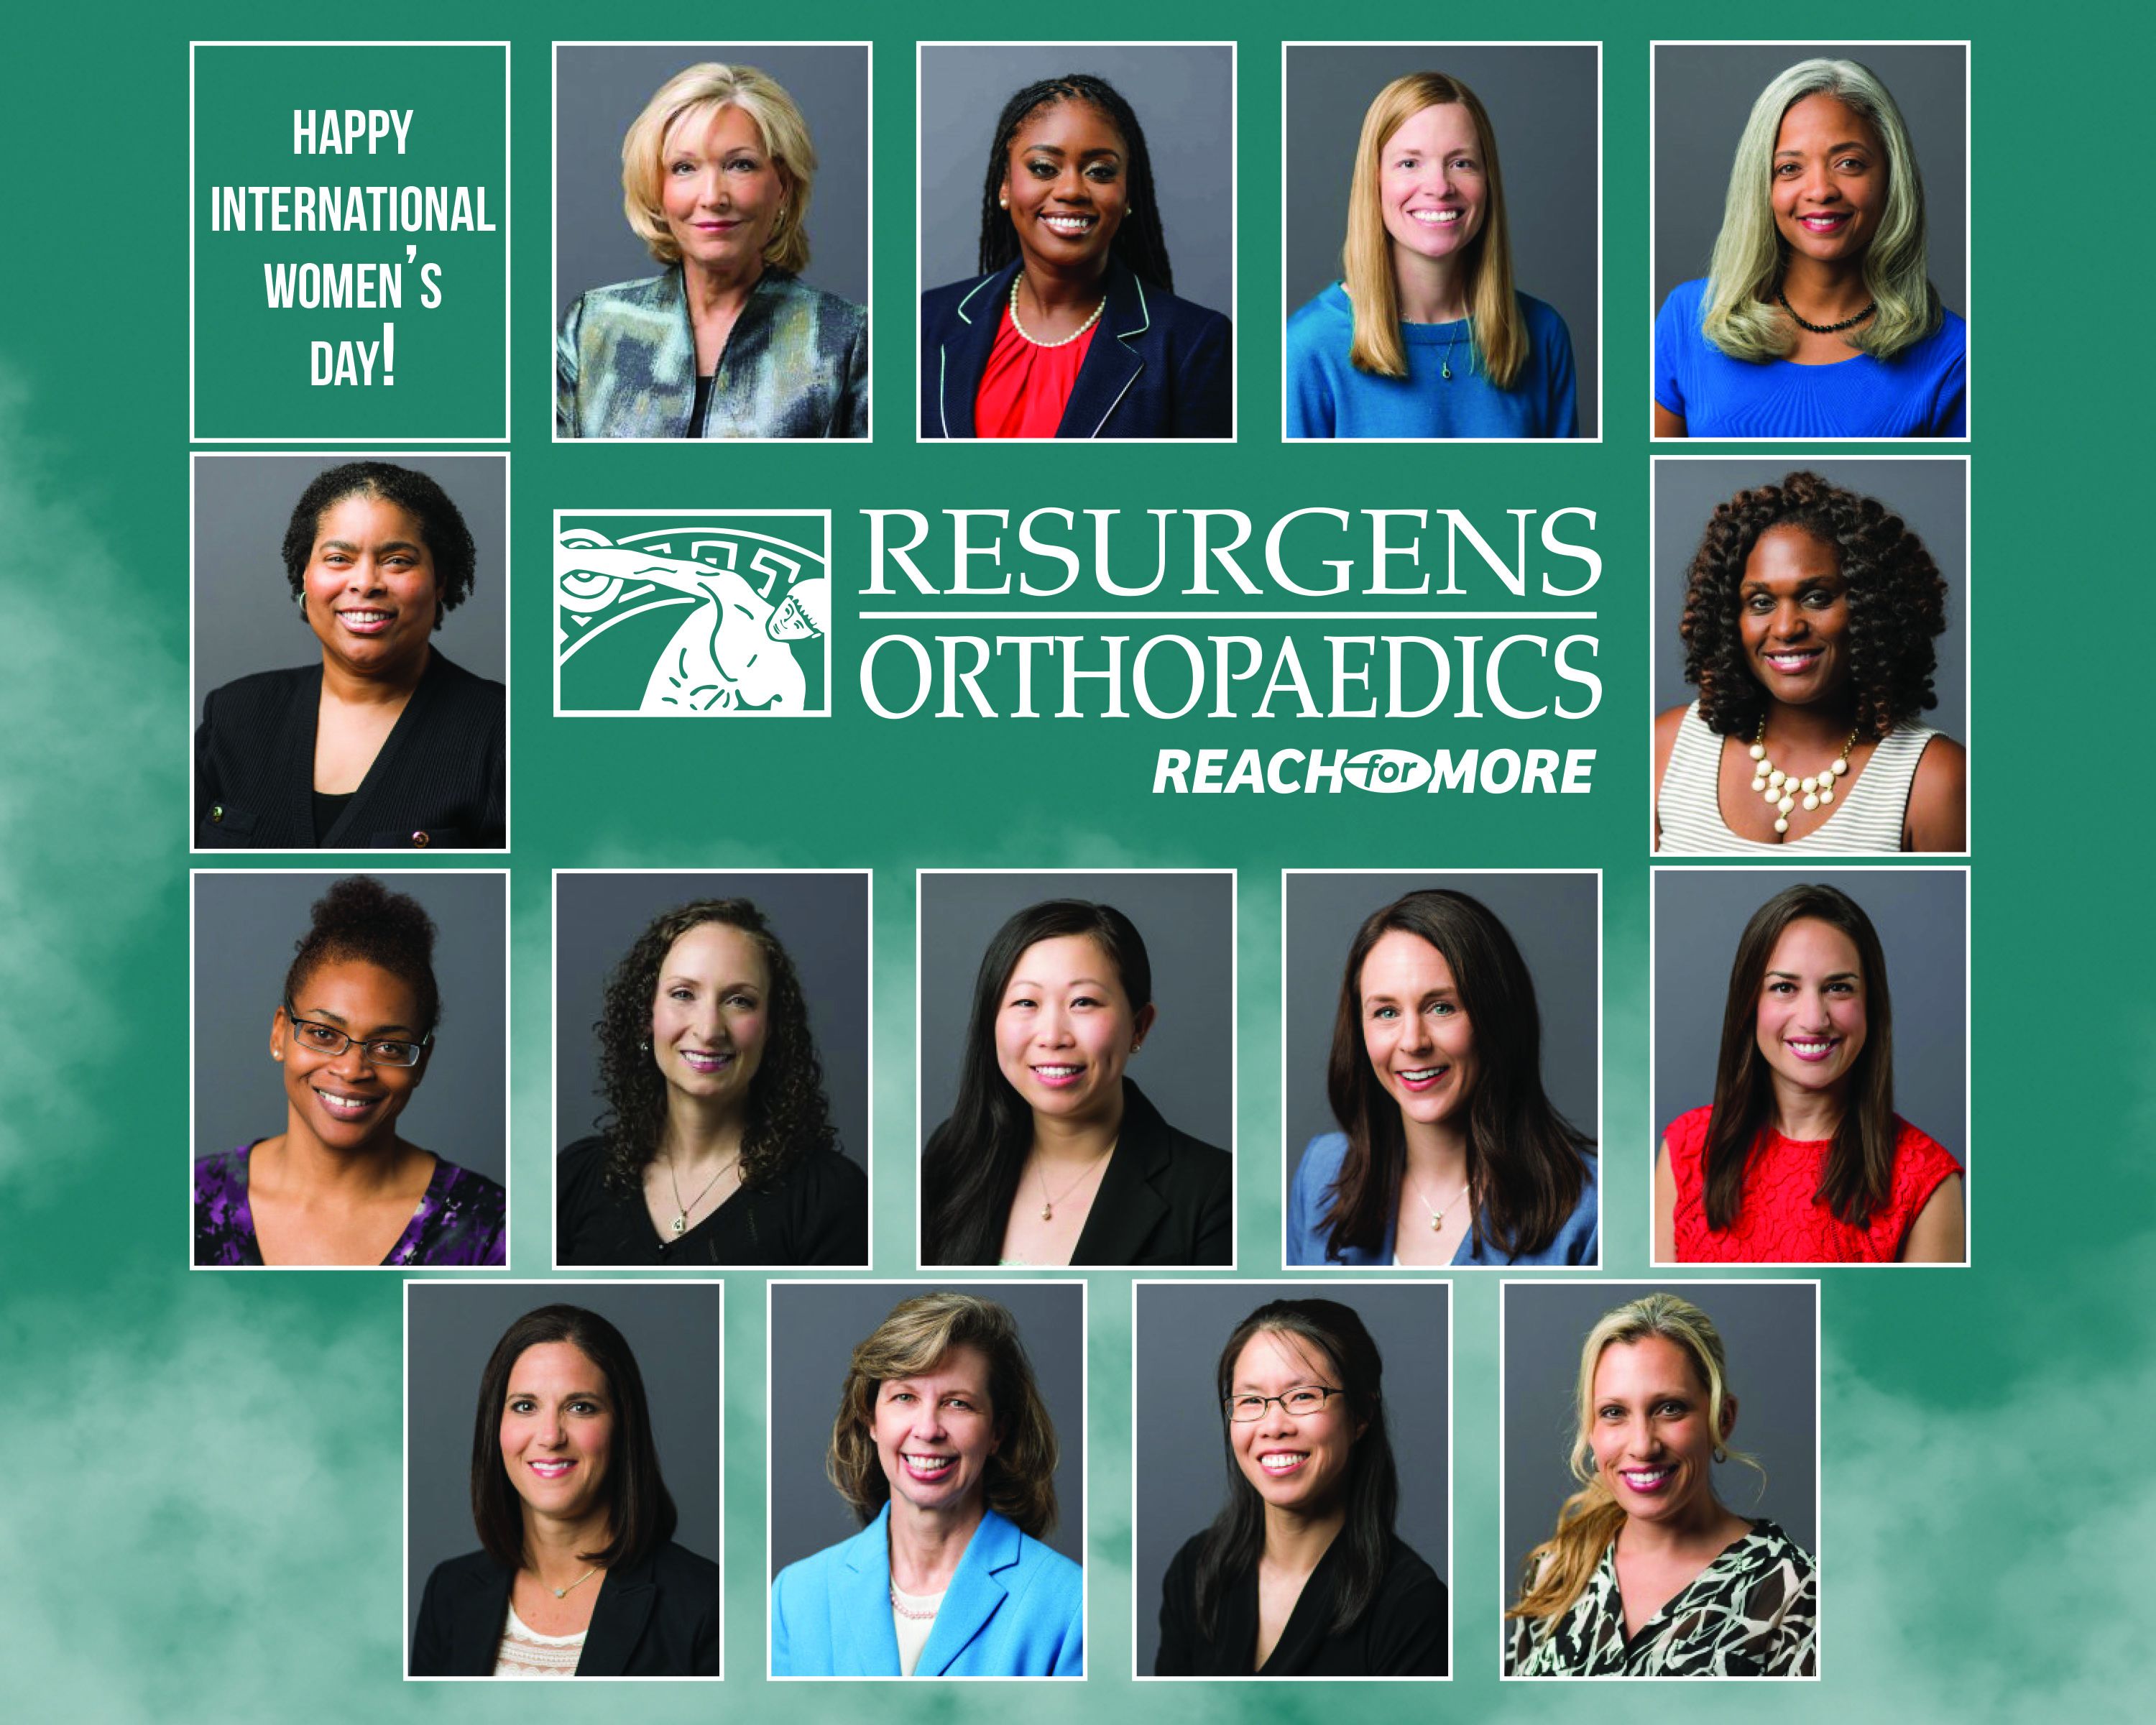 A designed collage depicting some of Resurgens' female employees.